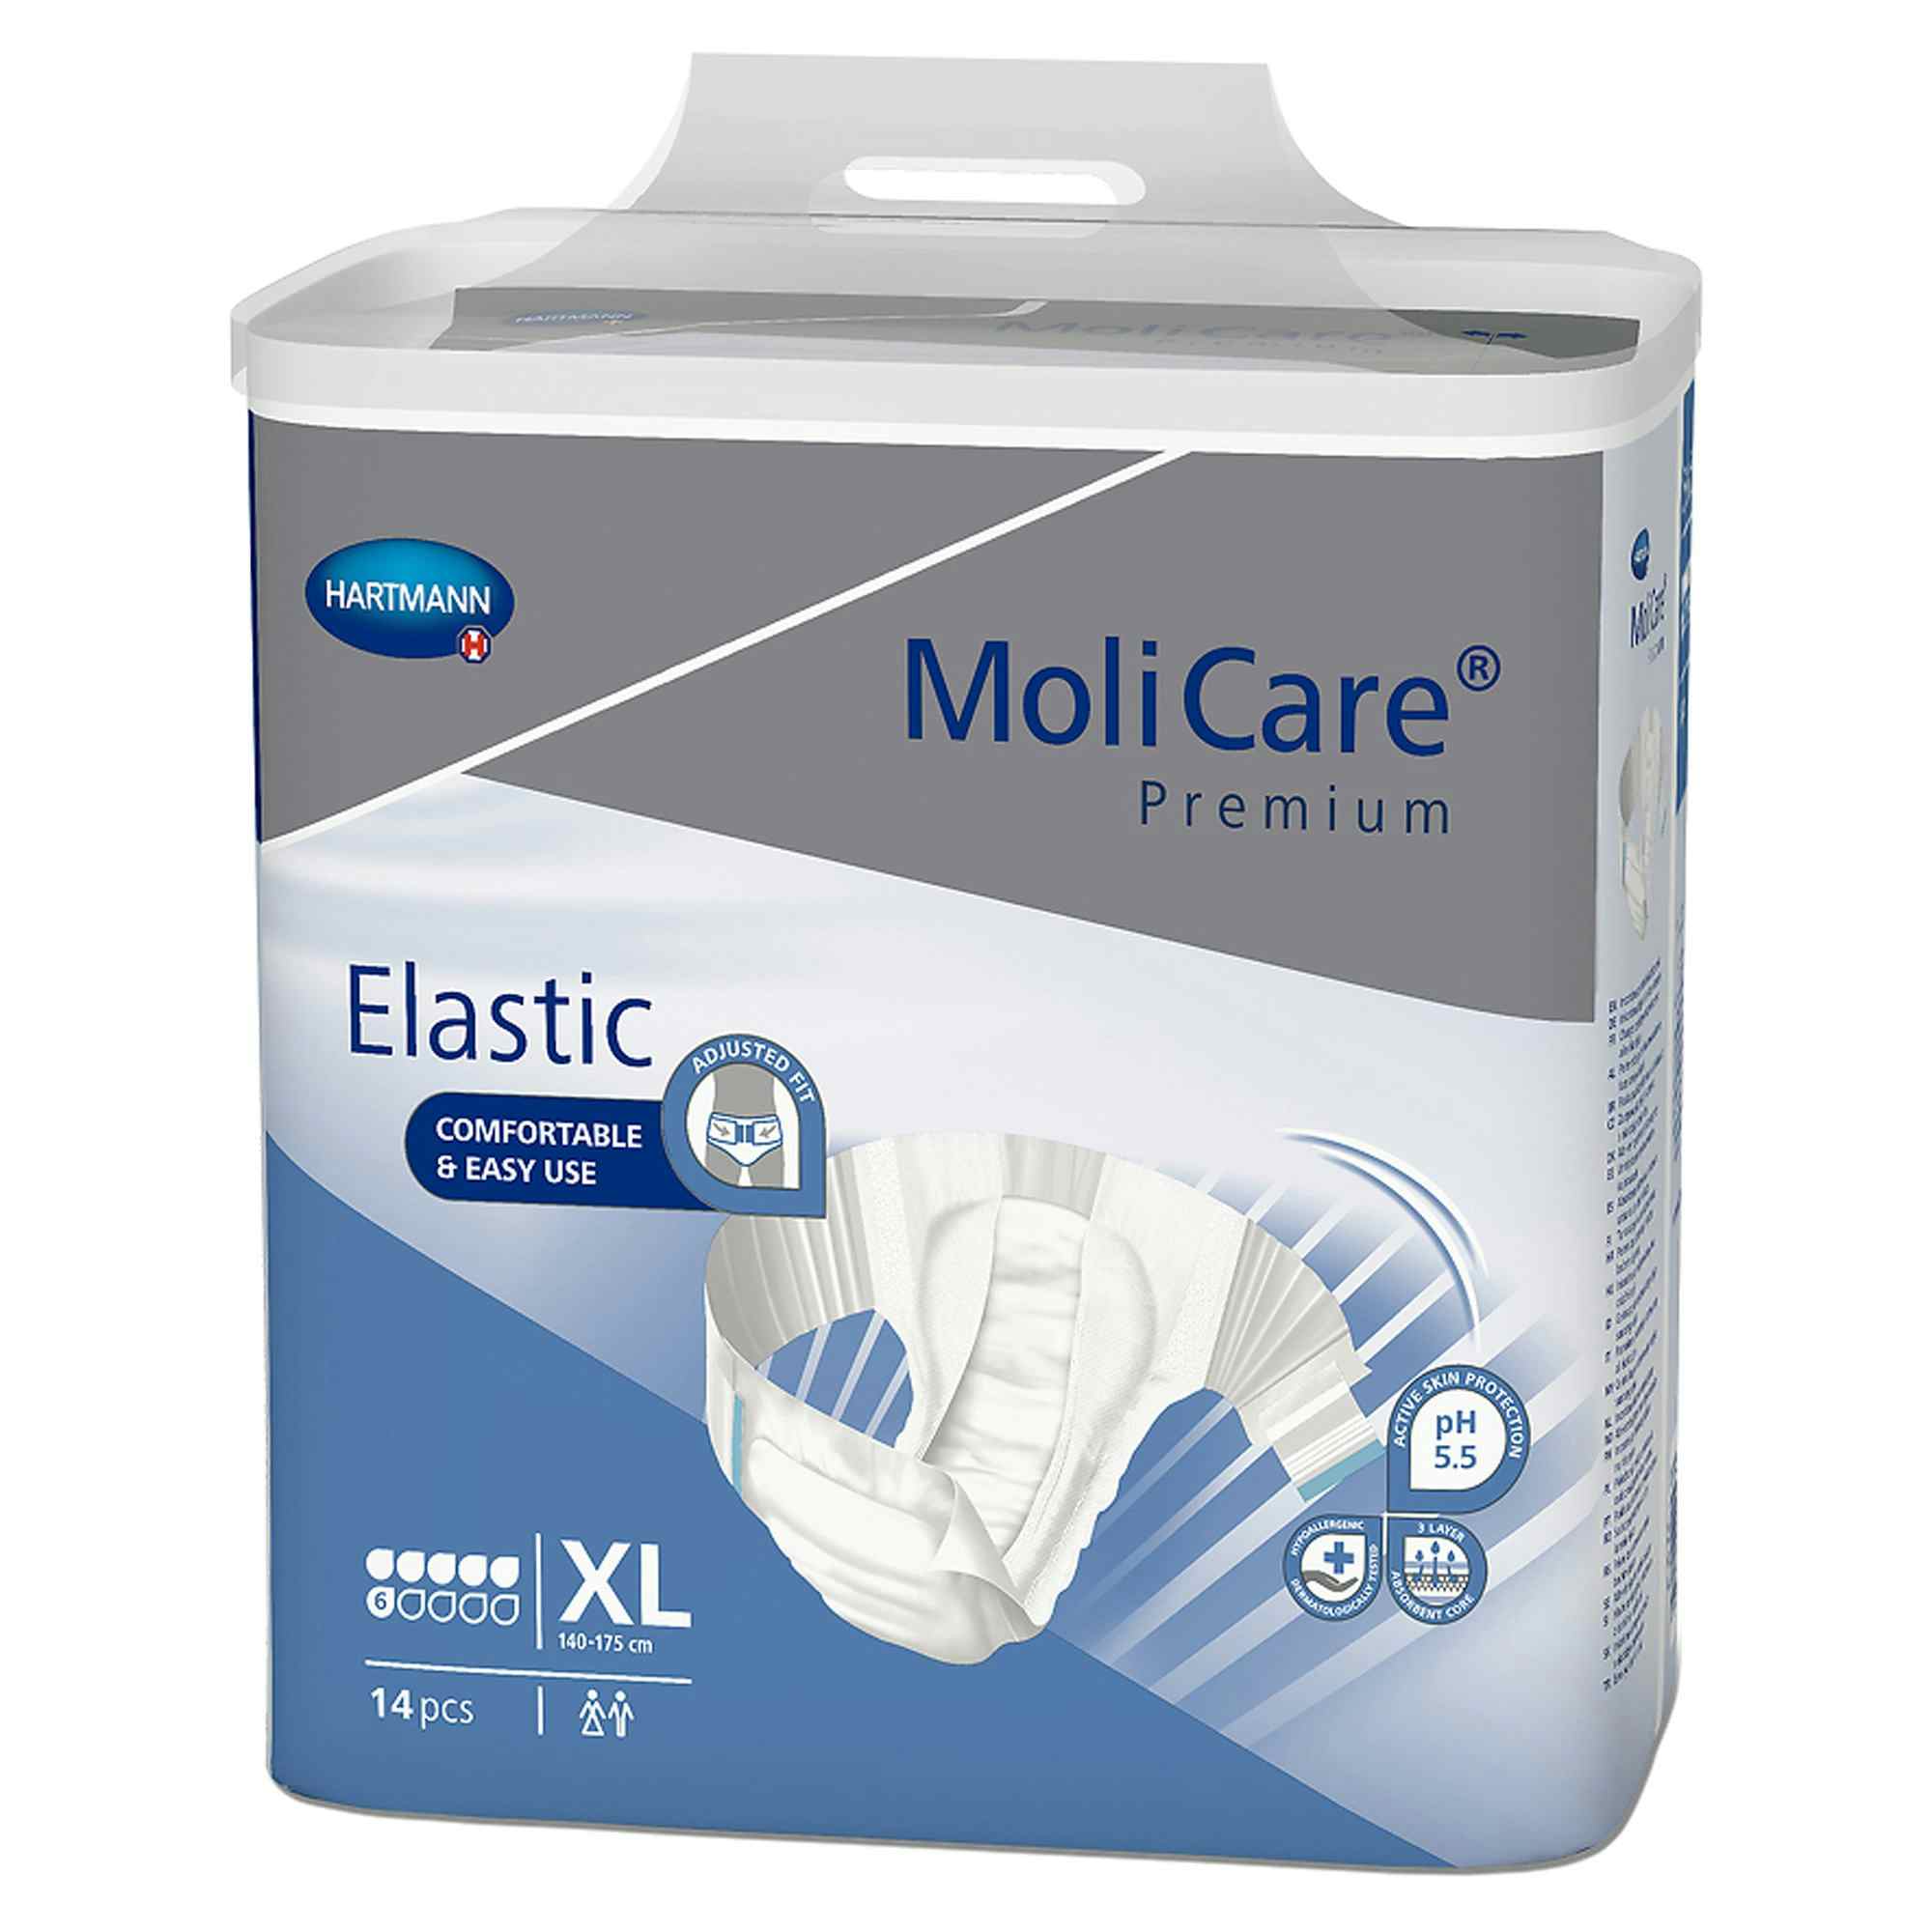 MoliCare Premium Elastic 6D Disposable Brief Adult Diapers with Tabs, Moderate Absorbency, 165274, X-Large (55-69") - Bag of 14